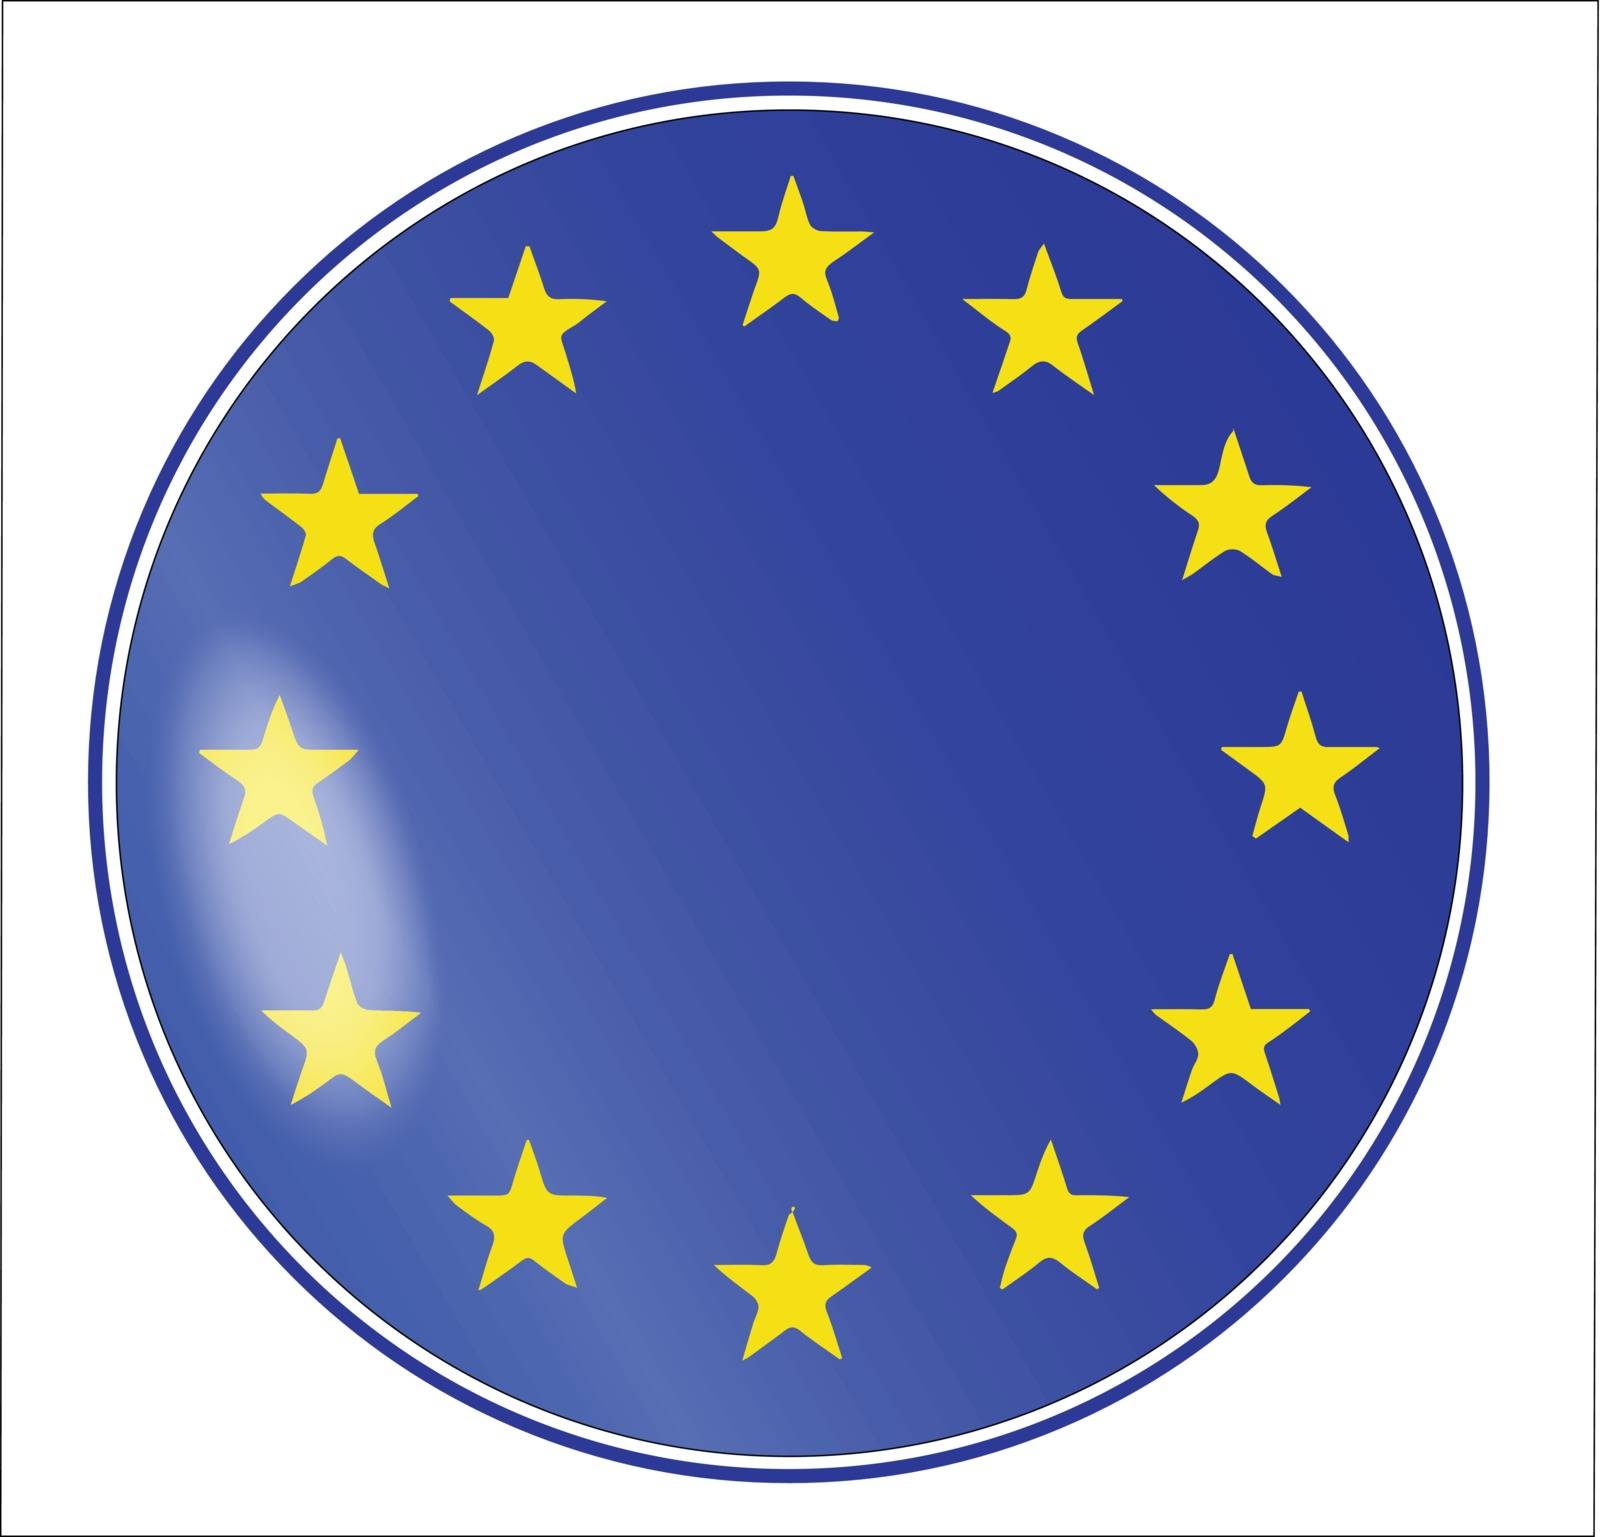 Flag of the European Union with blue background and yellow stars as a button over a white background